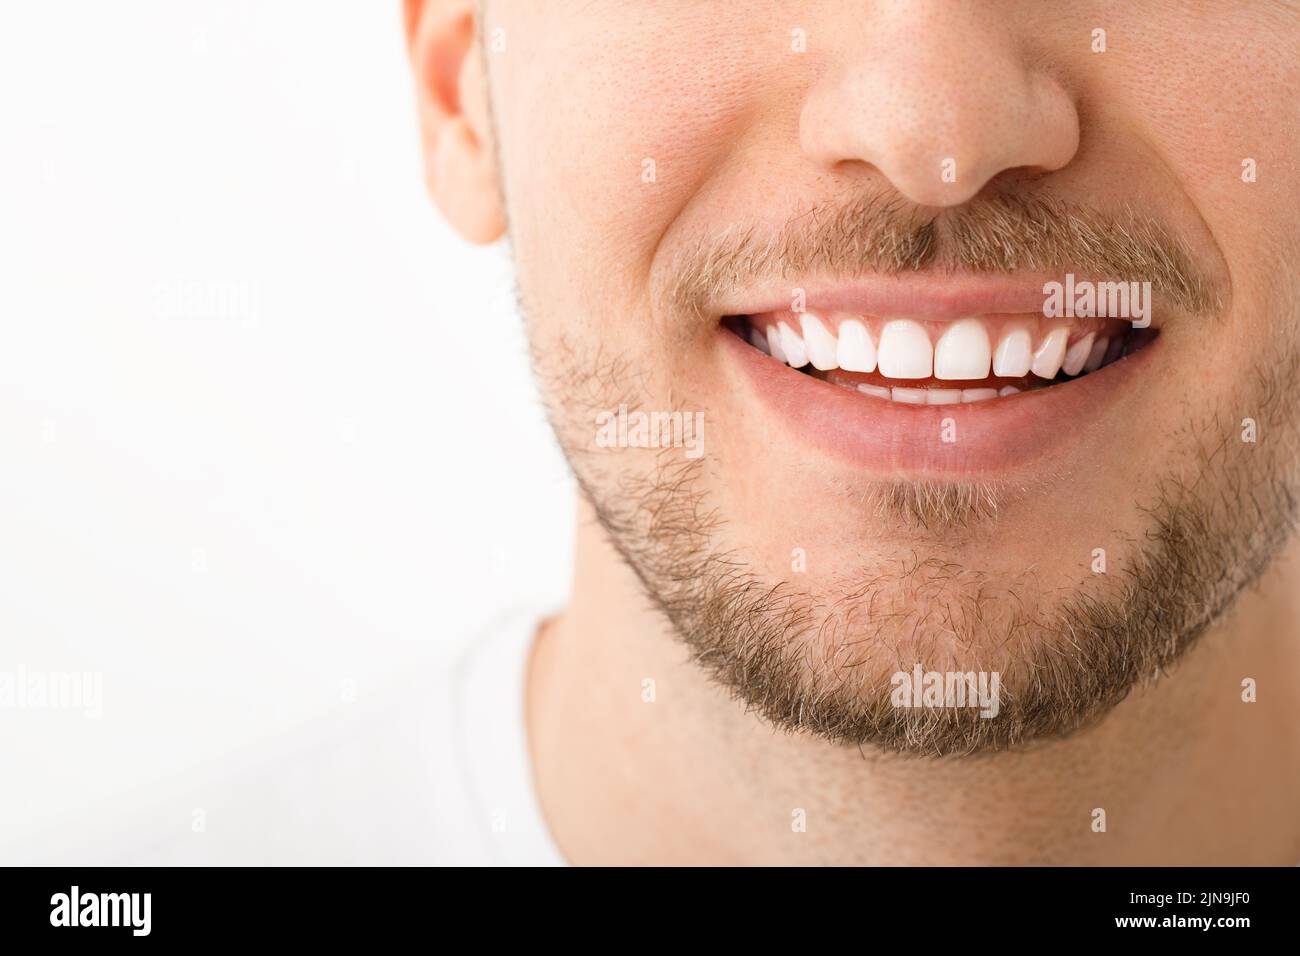 A beautiful man is smiling. a smile with white teeth. Close up image. White background with copyspace. Stock Photo